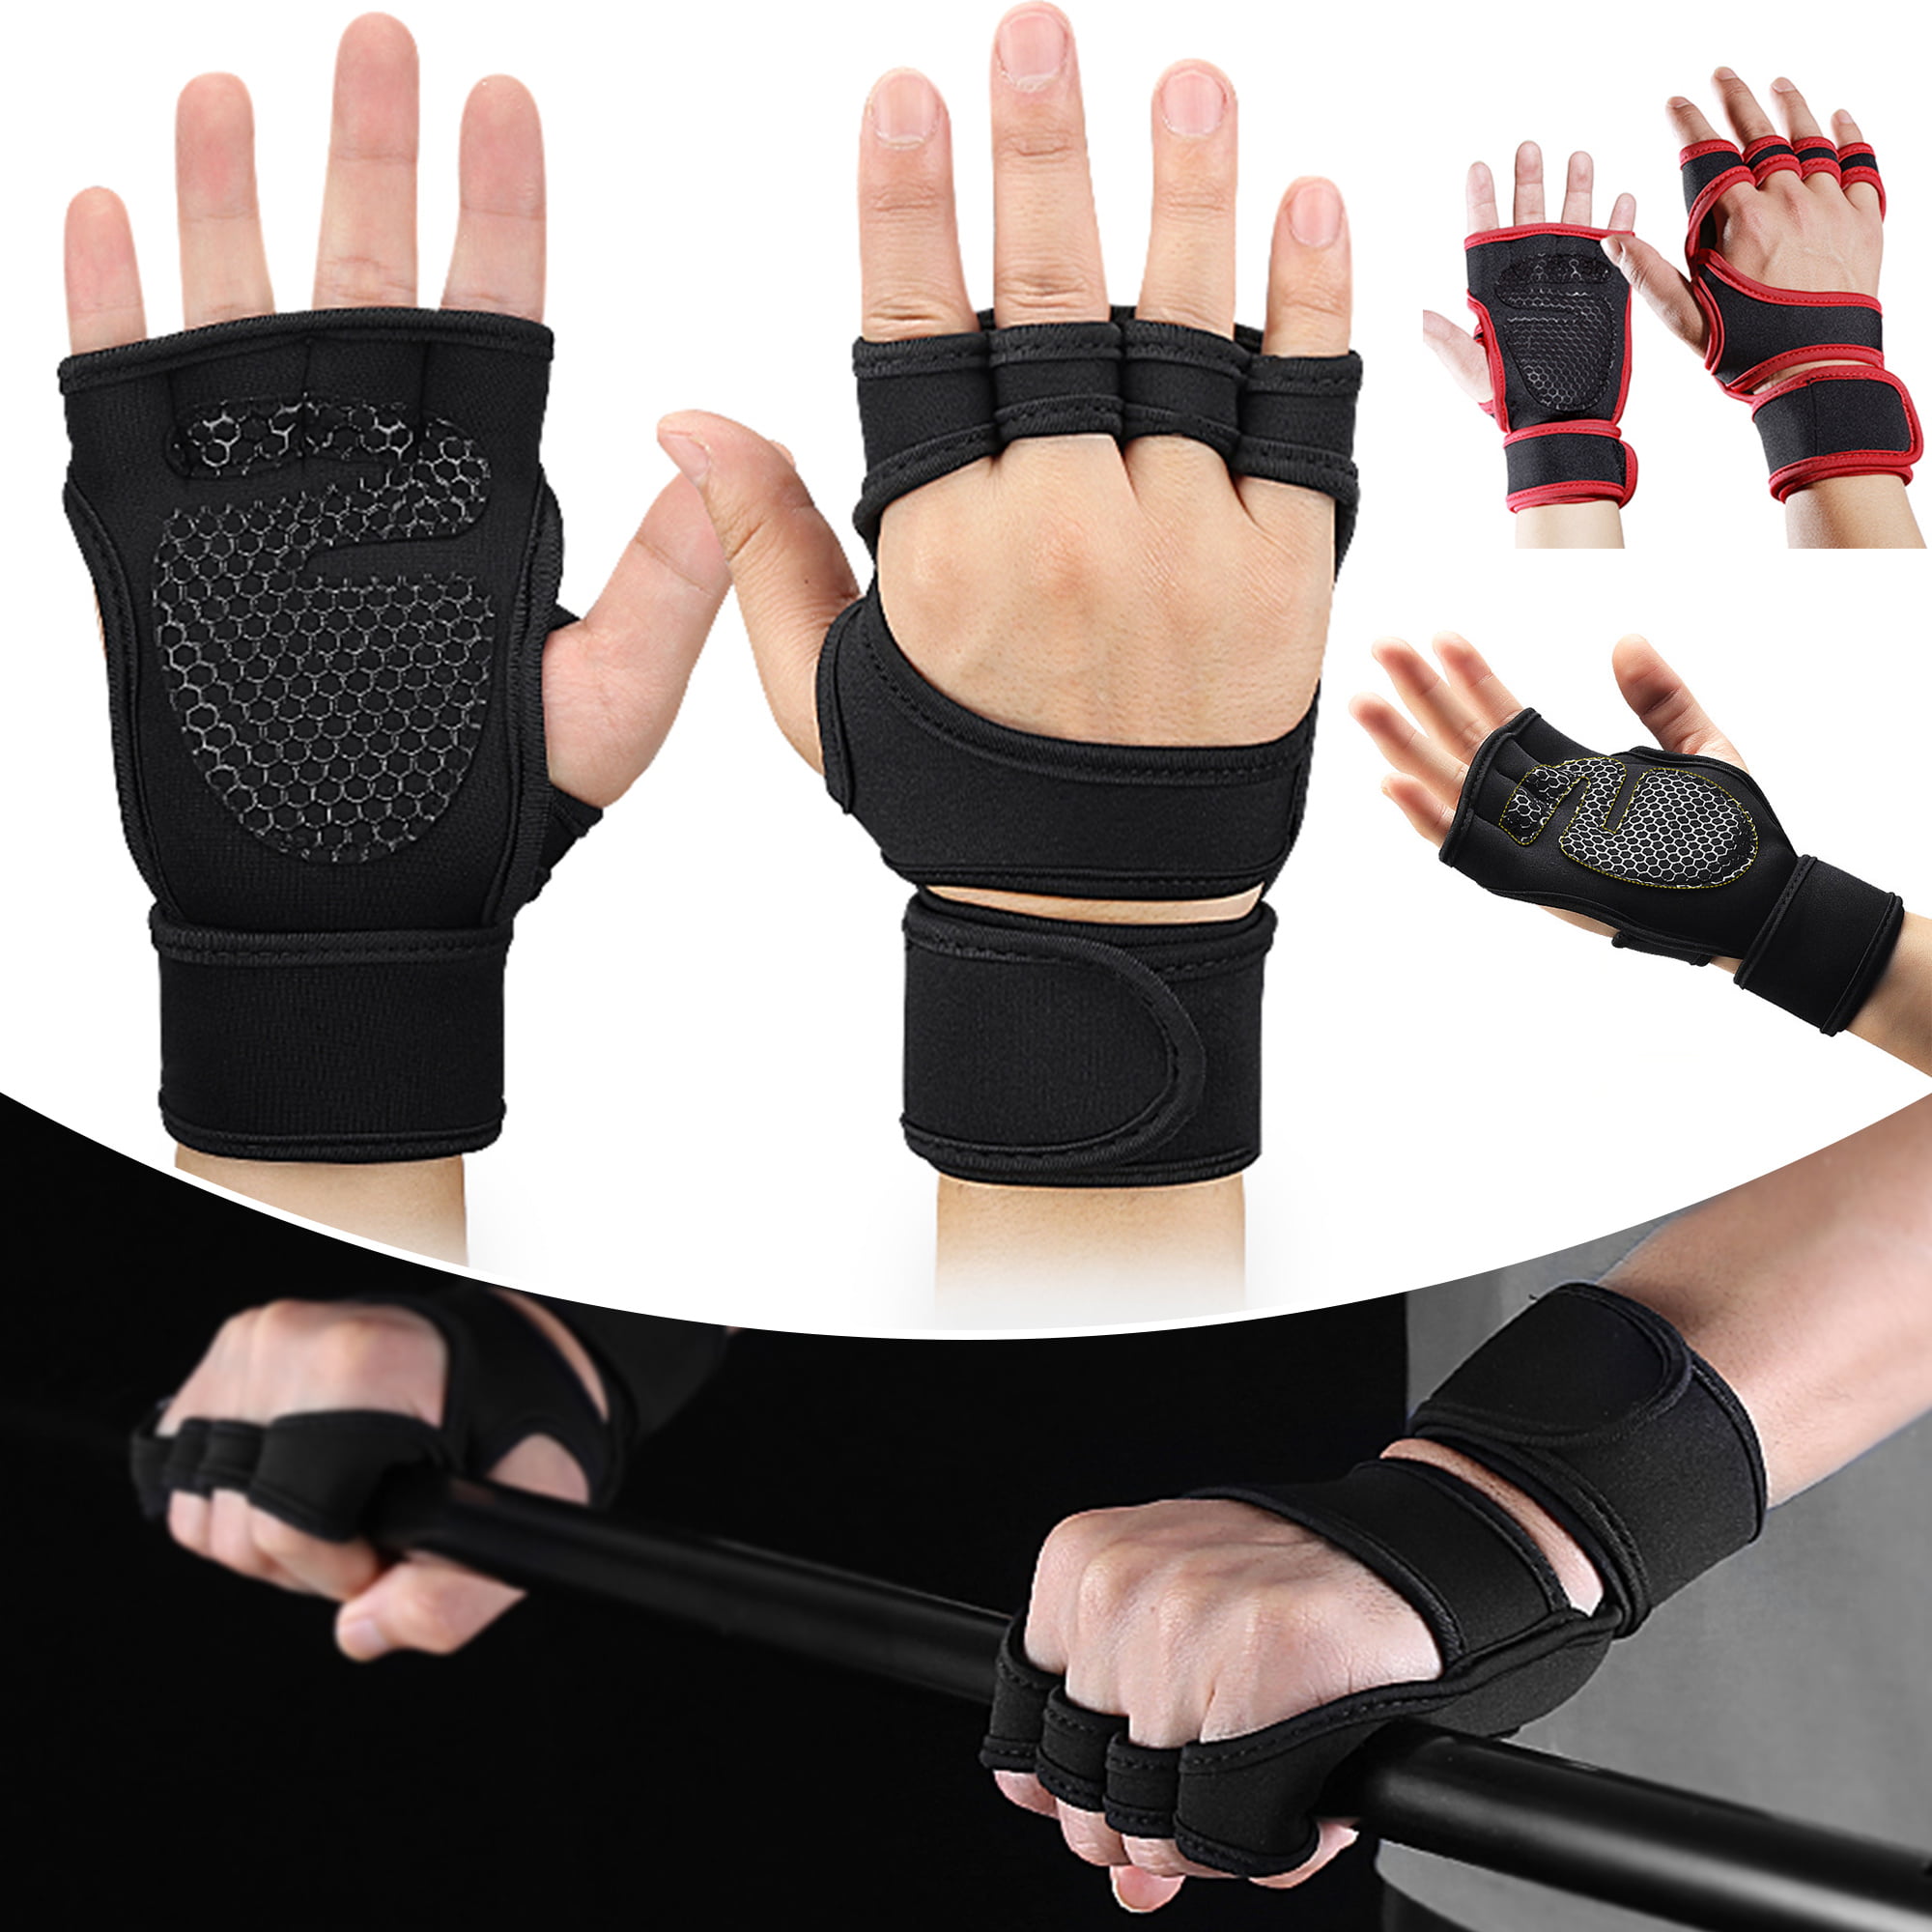 Details about   New 1 Pair Weightlifting Training Gloves Women Men Fitness Sports Body Building 